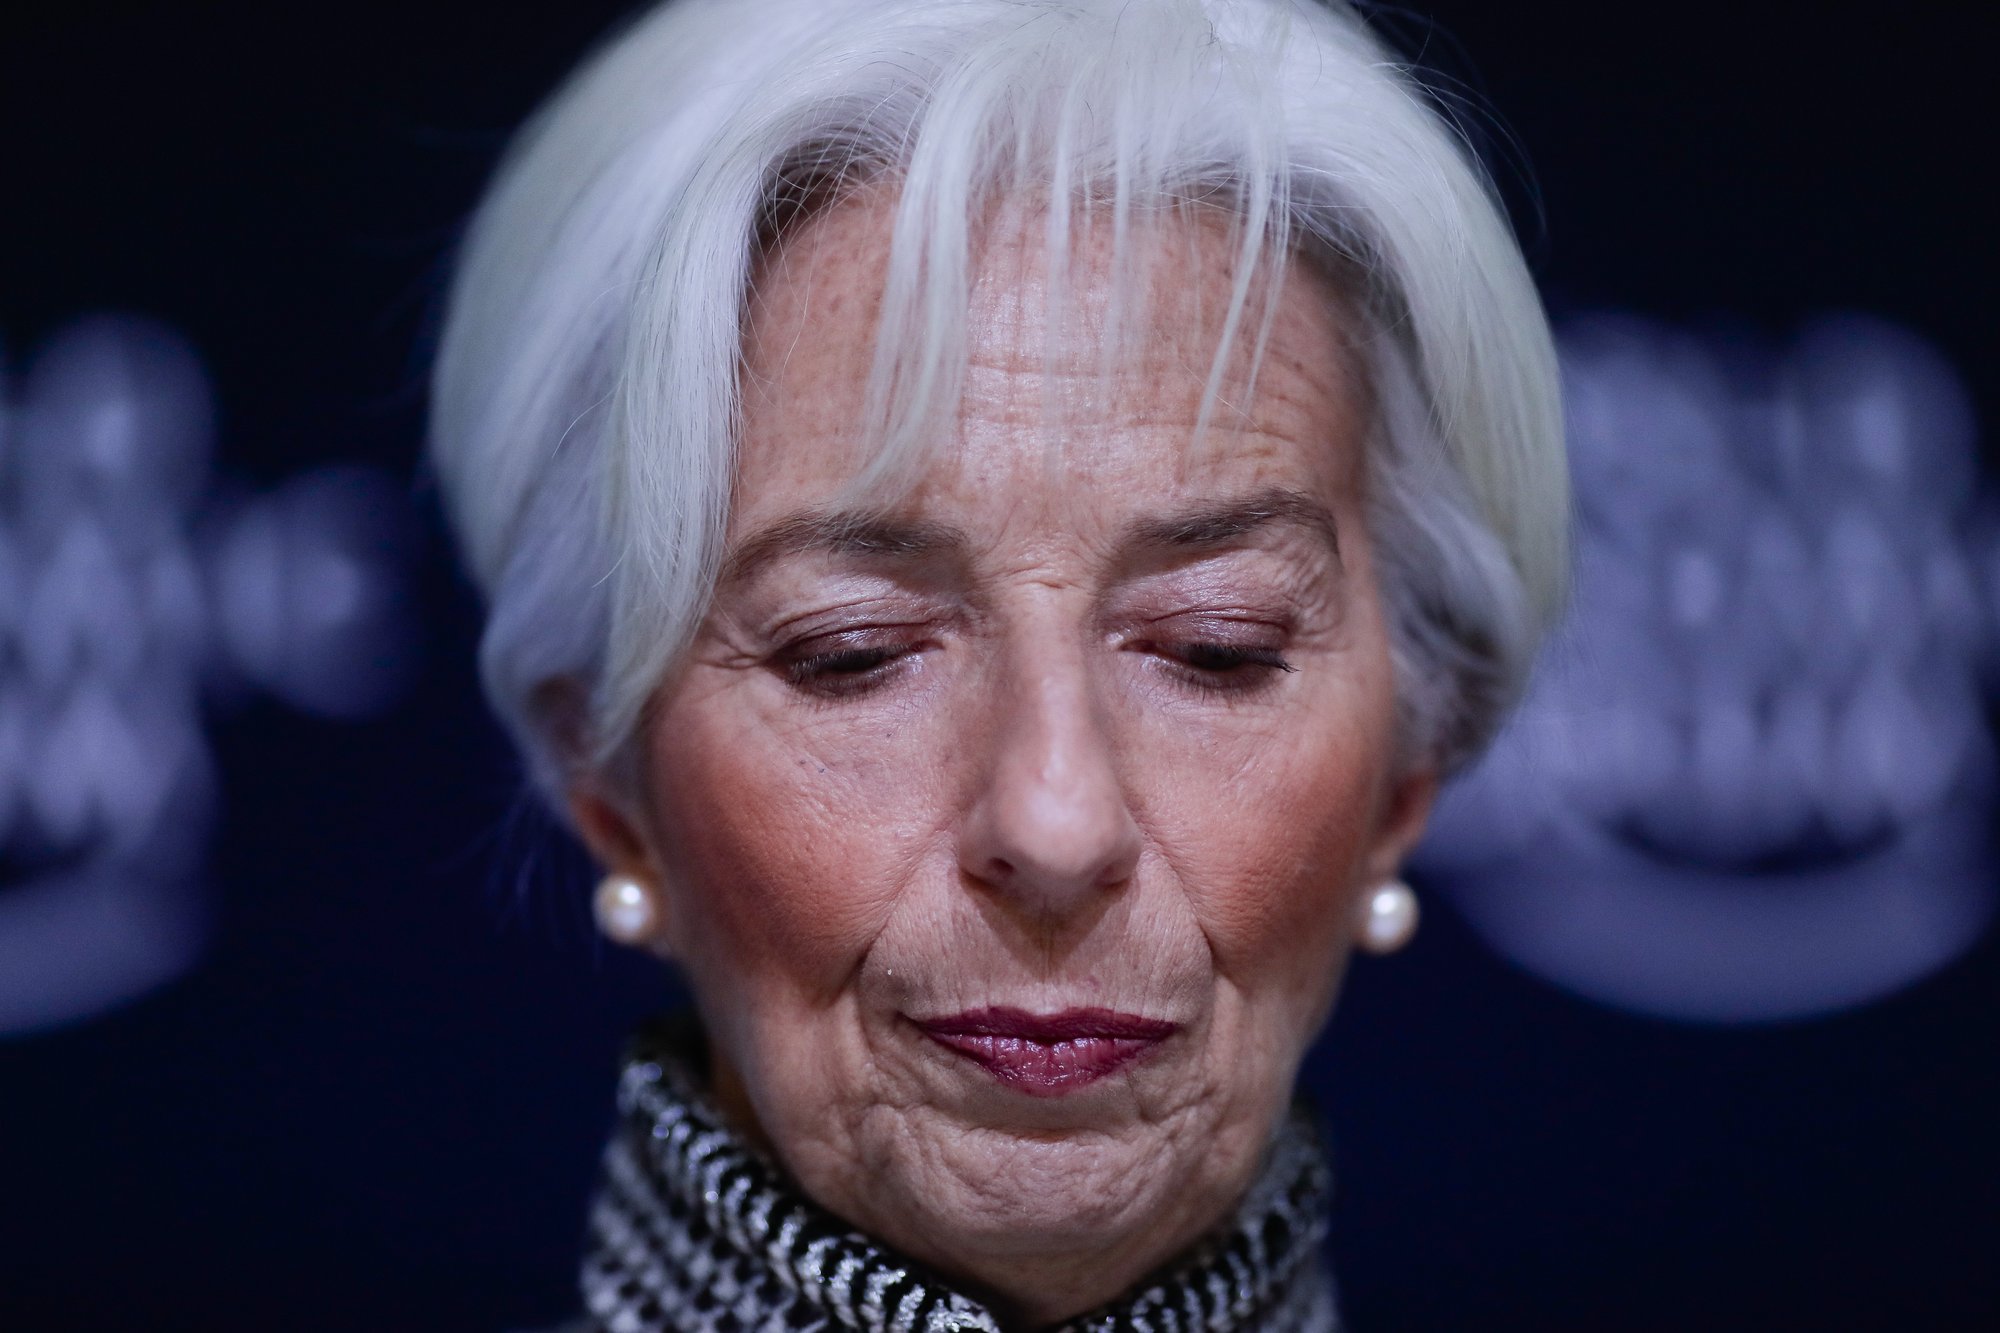 International Monetary Fund Managing Director Christine Lagarde briefs the media during a news conference at the annual meeting of the World Economic Forum, WEF, in Davos, Monday, Jan. 21, 2019. Photo via AP/Markus Schreiber.